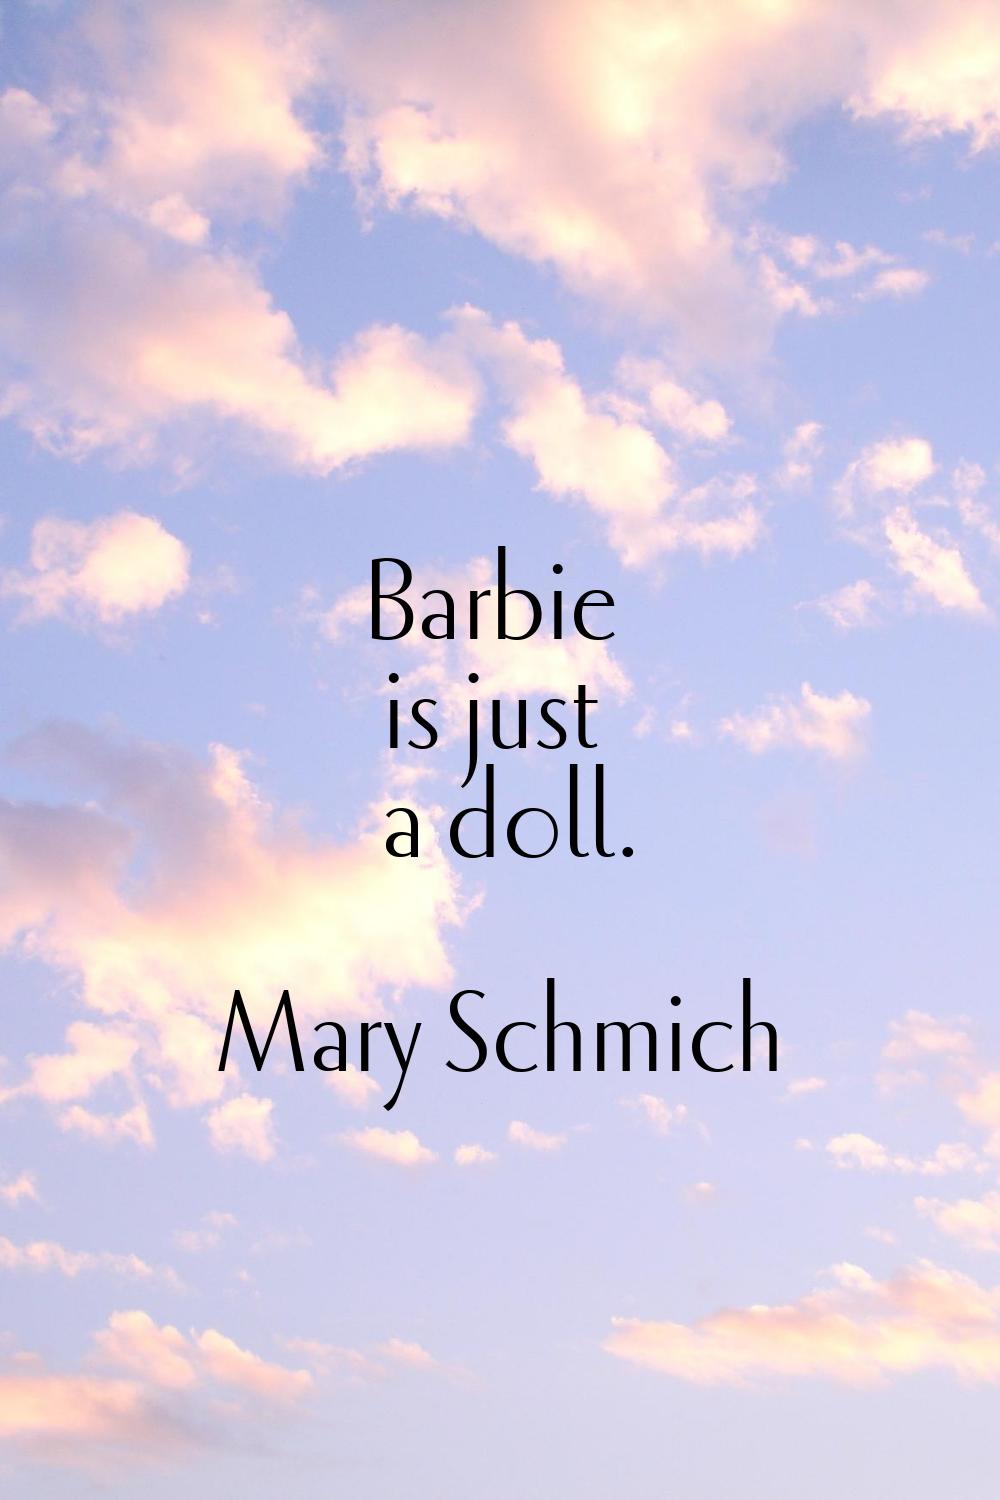 Barbie is just a doll.